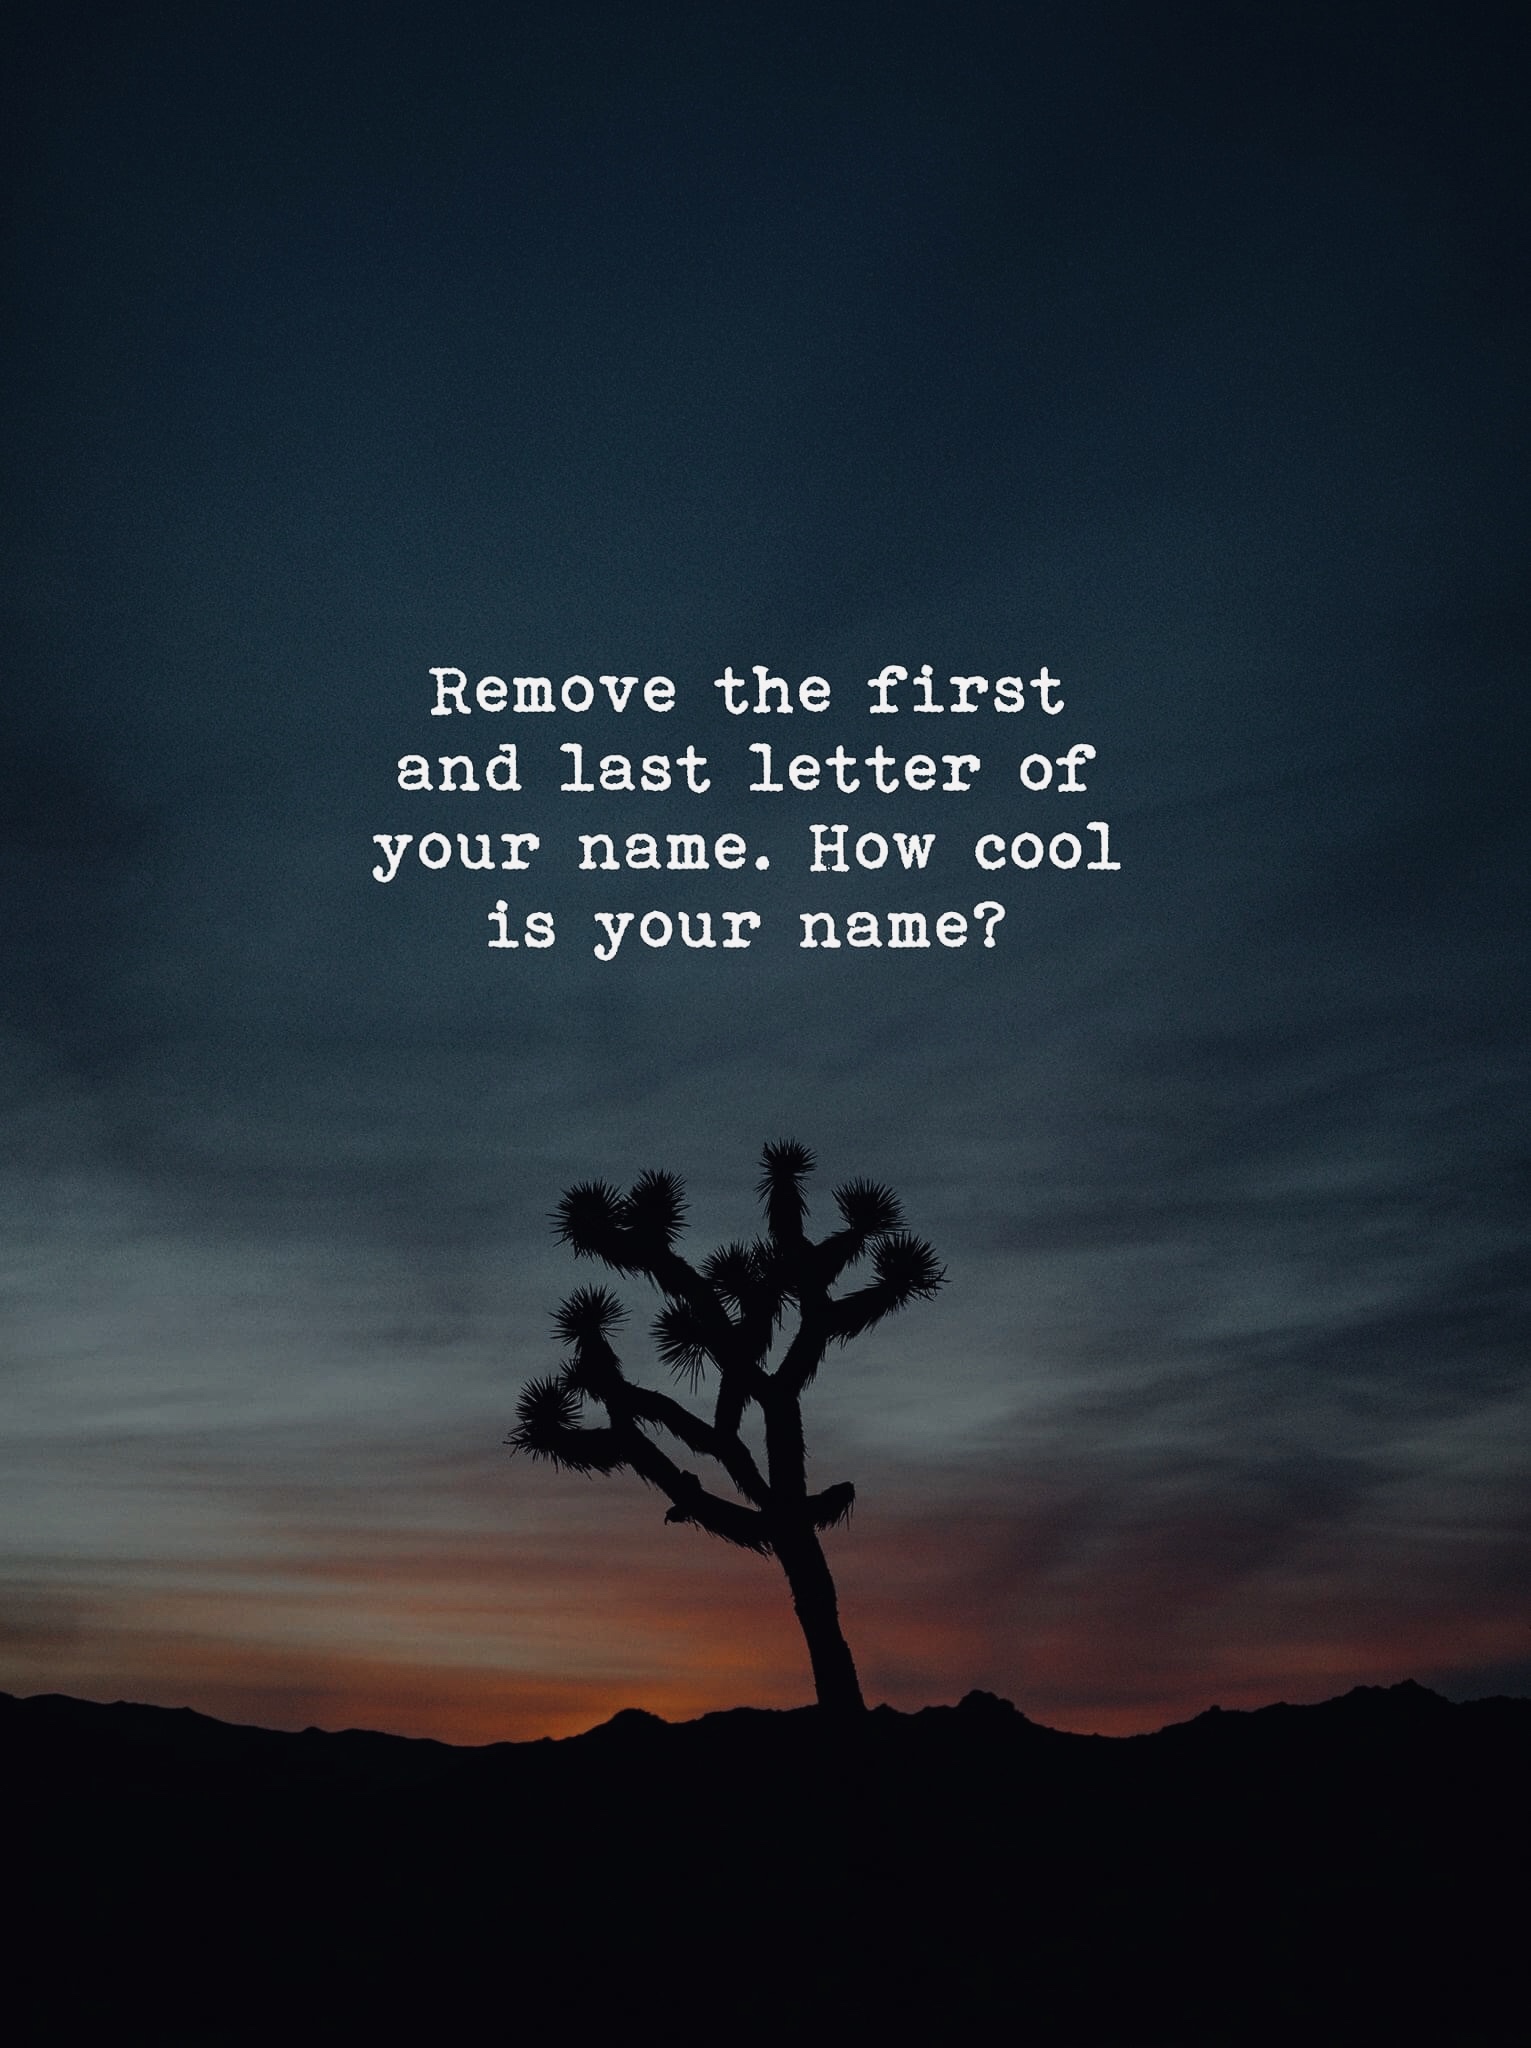 Remove the first and last letter of your name. How cool is your name?